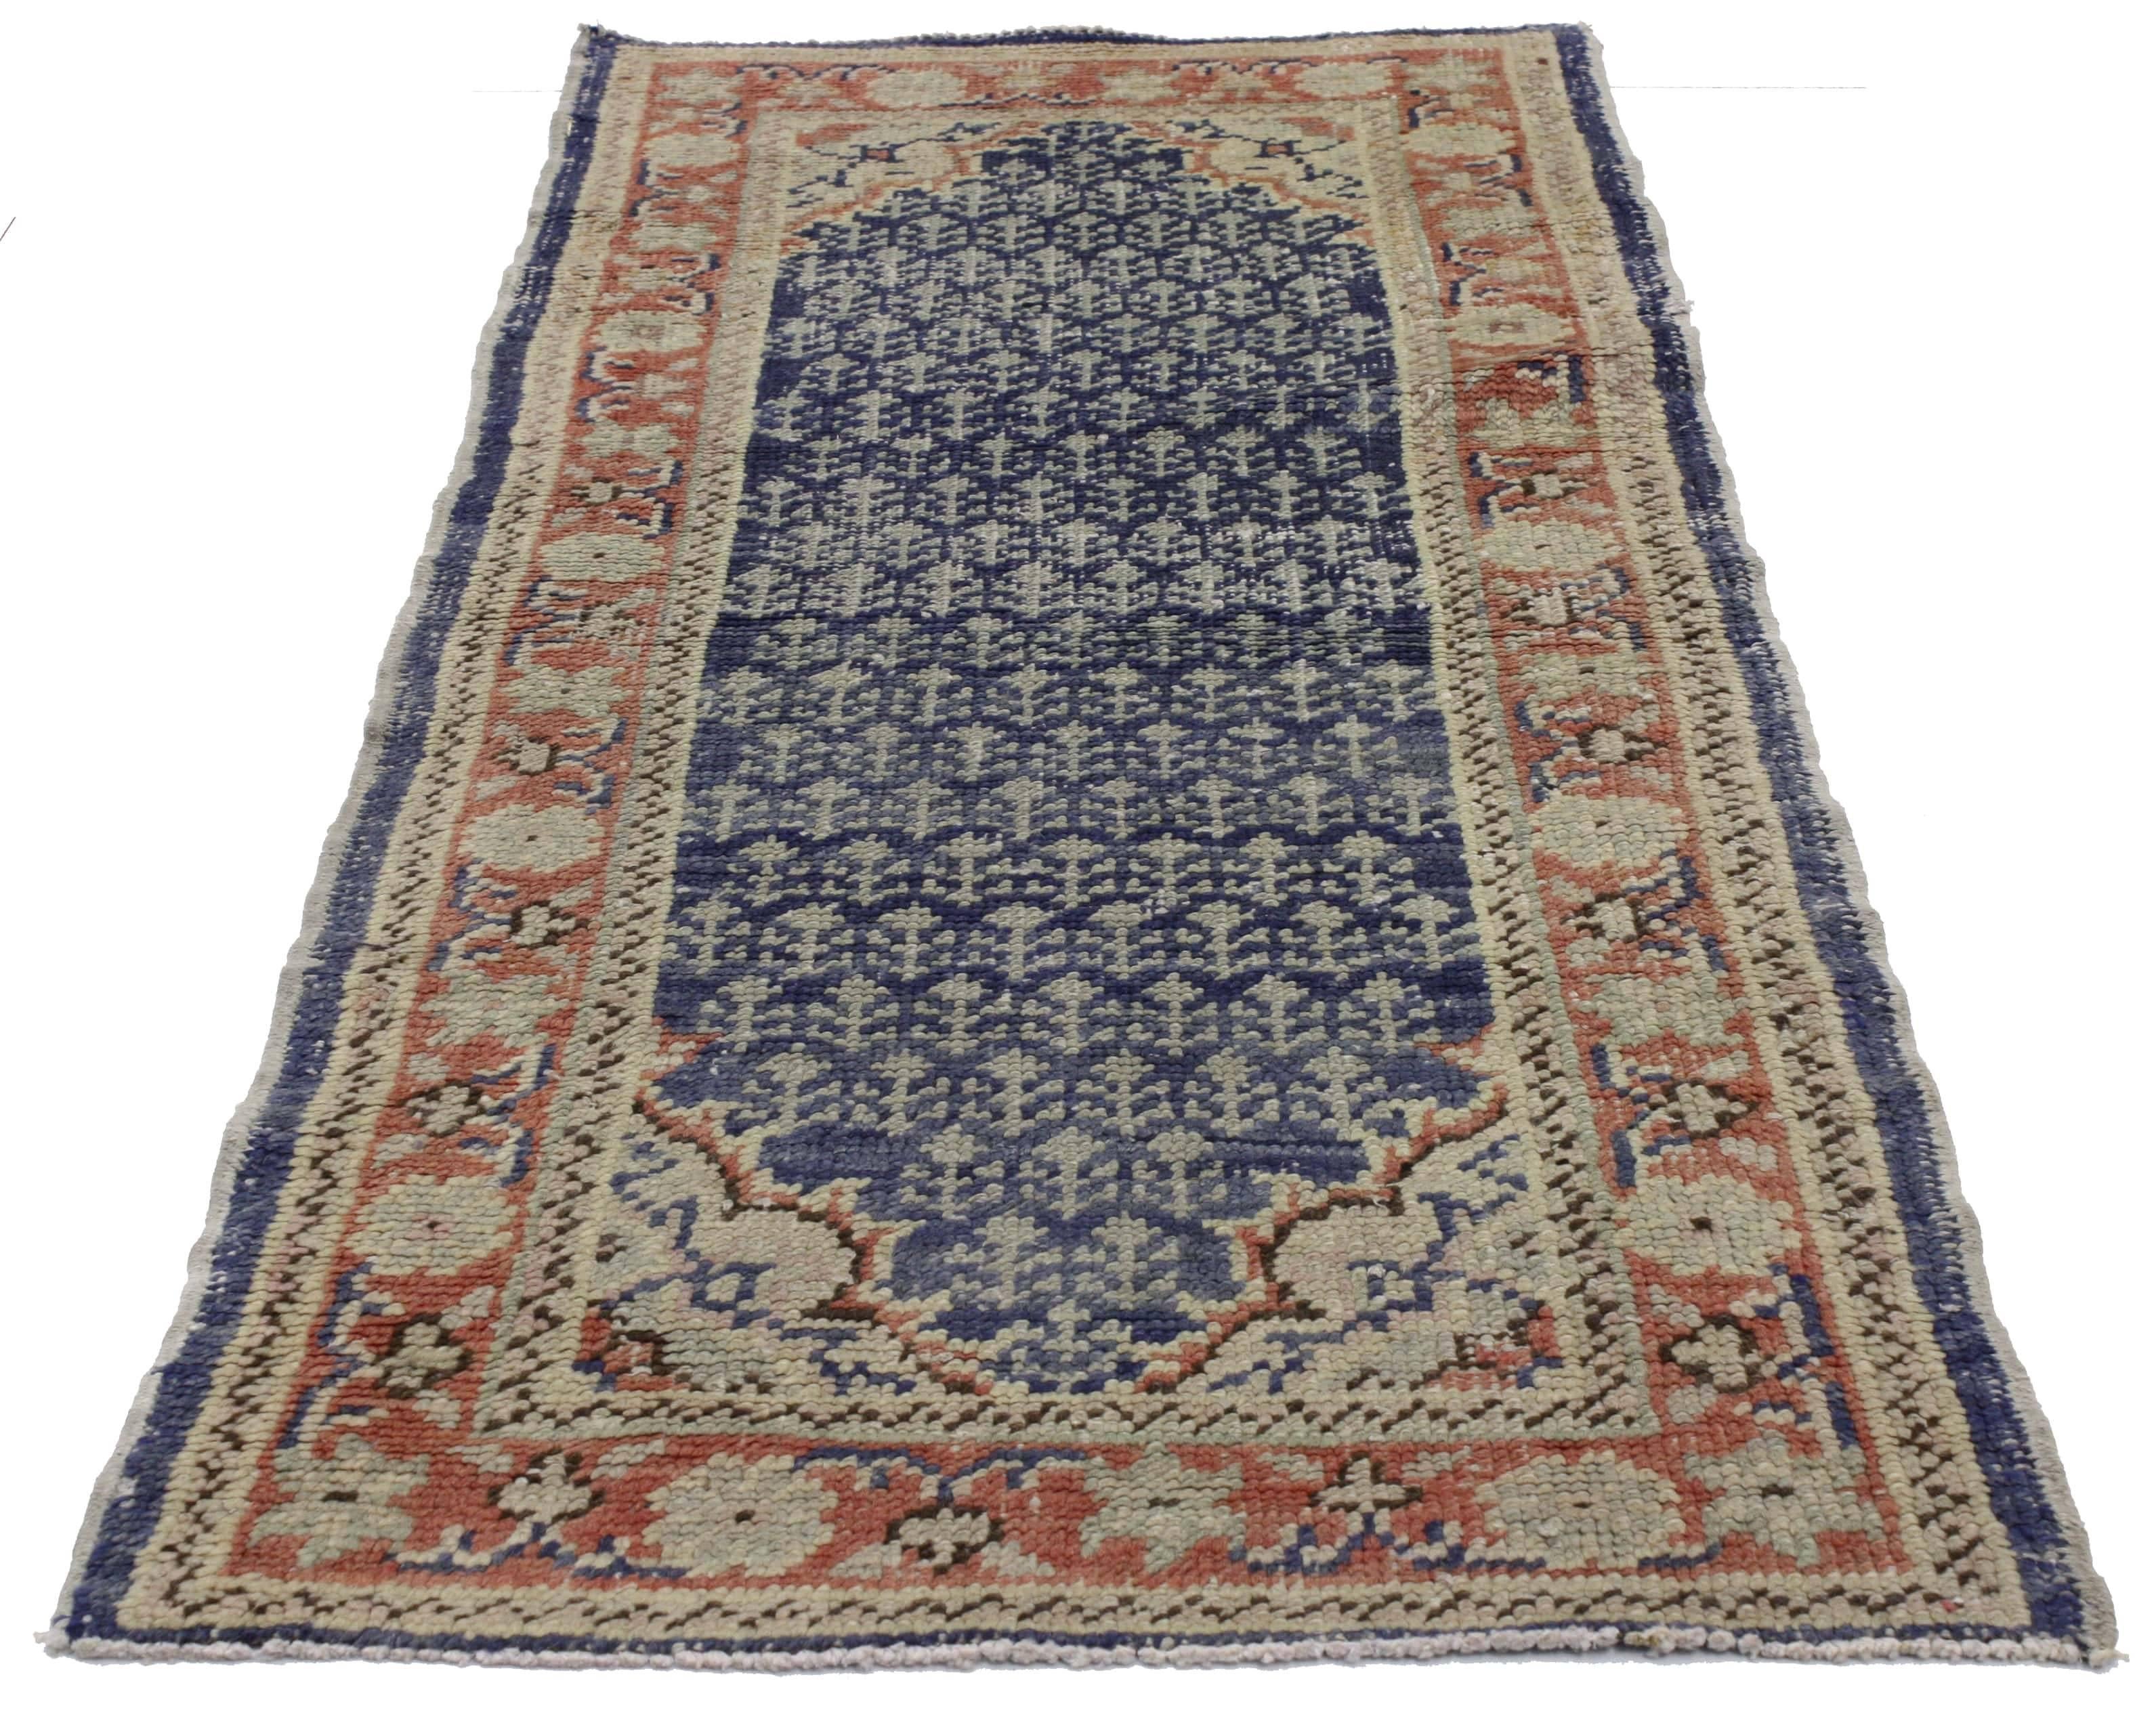 51551, rustic style distressed Turkish Sivas accent rug. This hand knotted rustic style Turkish Sivas rug features a repeating boteh pattern recalling a Mir Boteh, or repeating paisley motif, although here composed of miniature tree of life motifs.